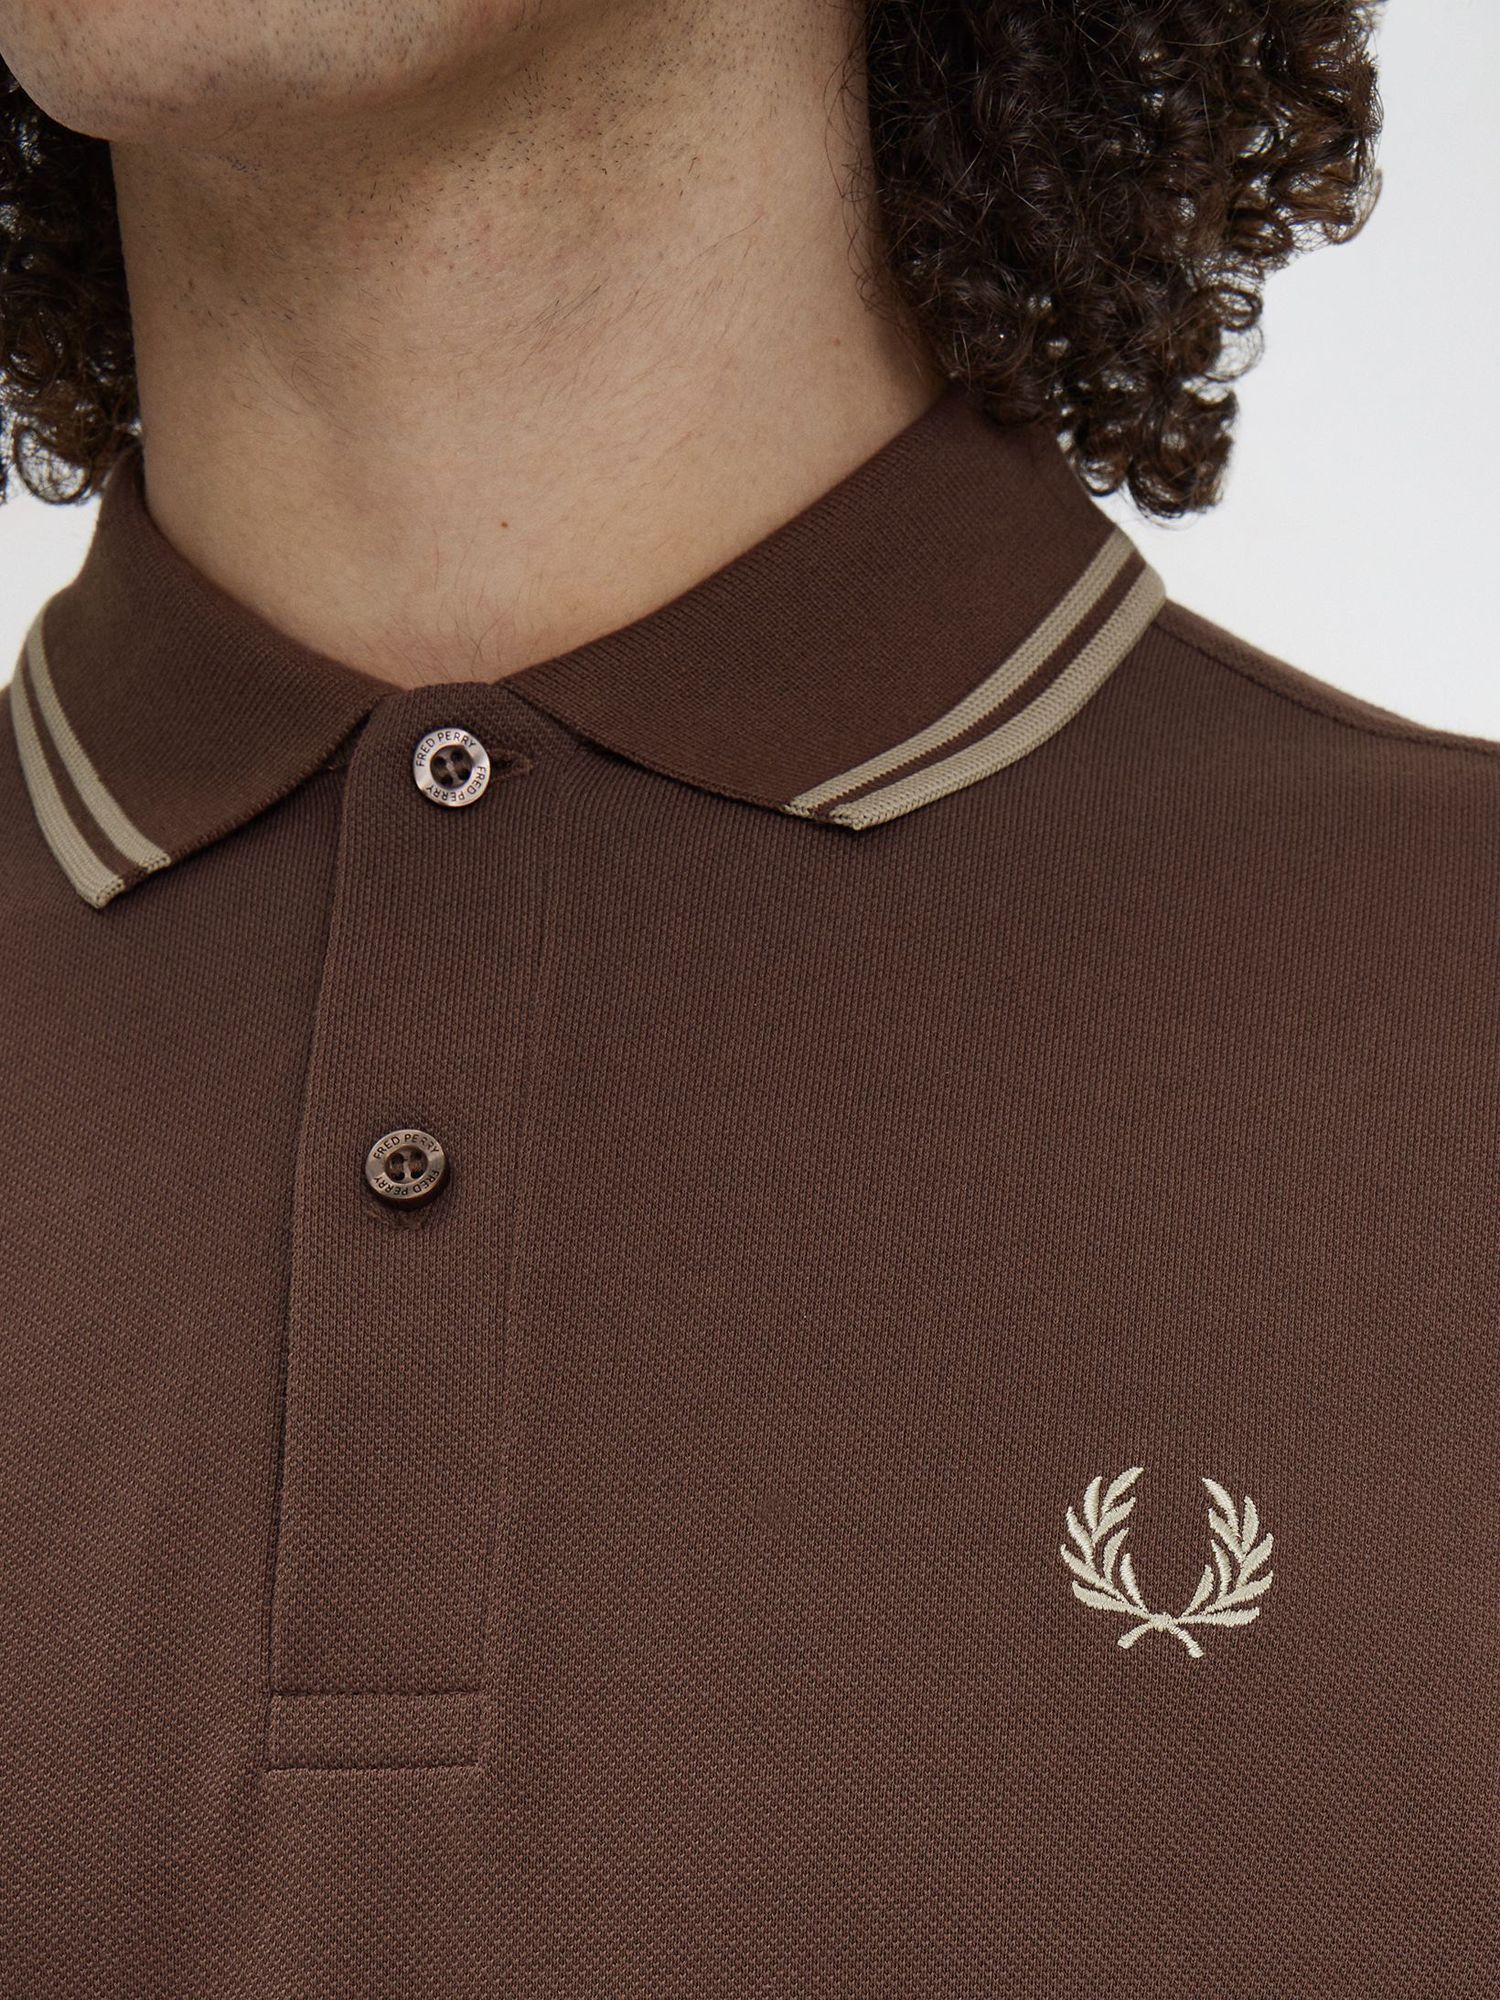 Fred Perry Twin Tipped Tennis Long Sleeve Polo Shirt, Brick/Warm Grey, L